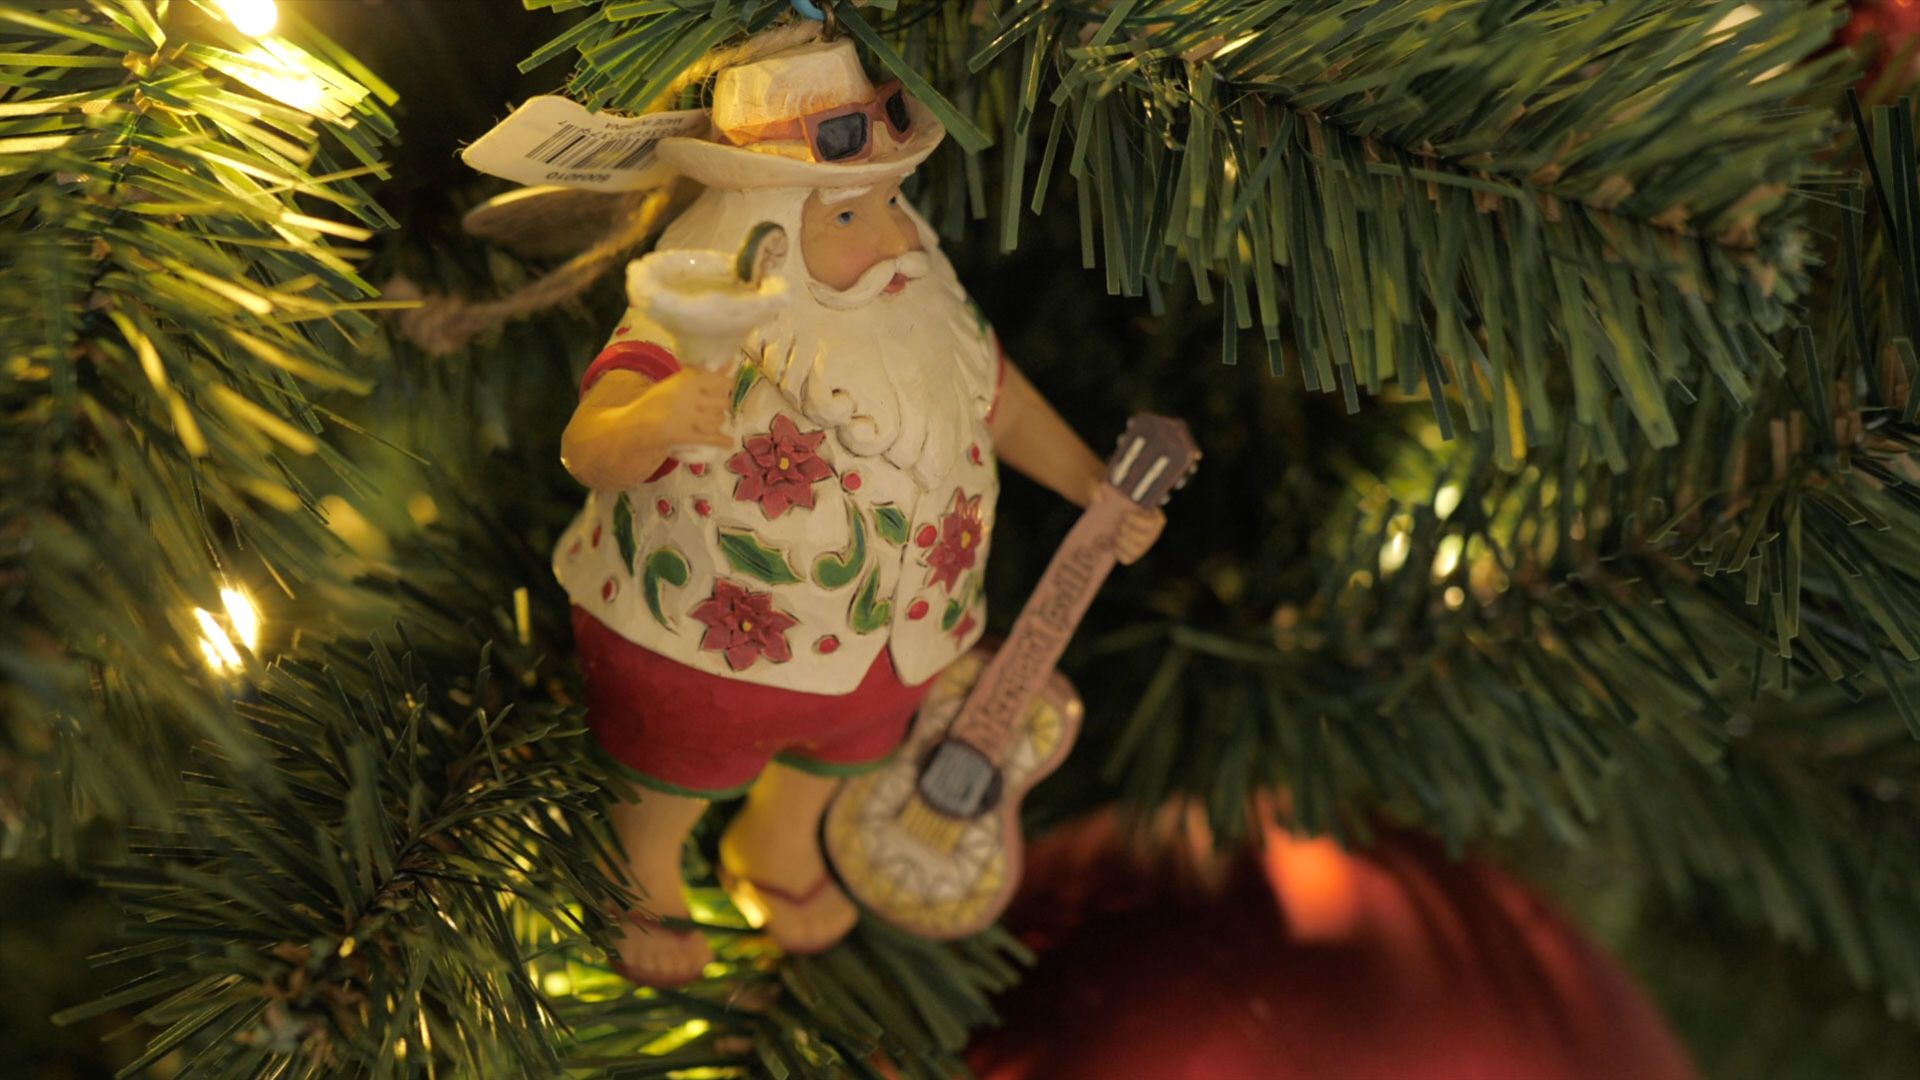 Christmas tree ornament of Santa Claus in a tropical outfit.